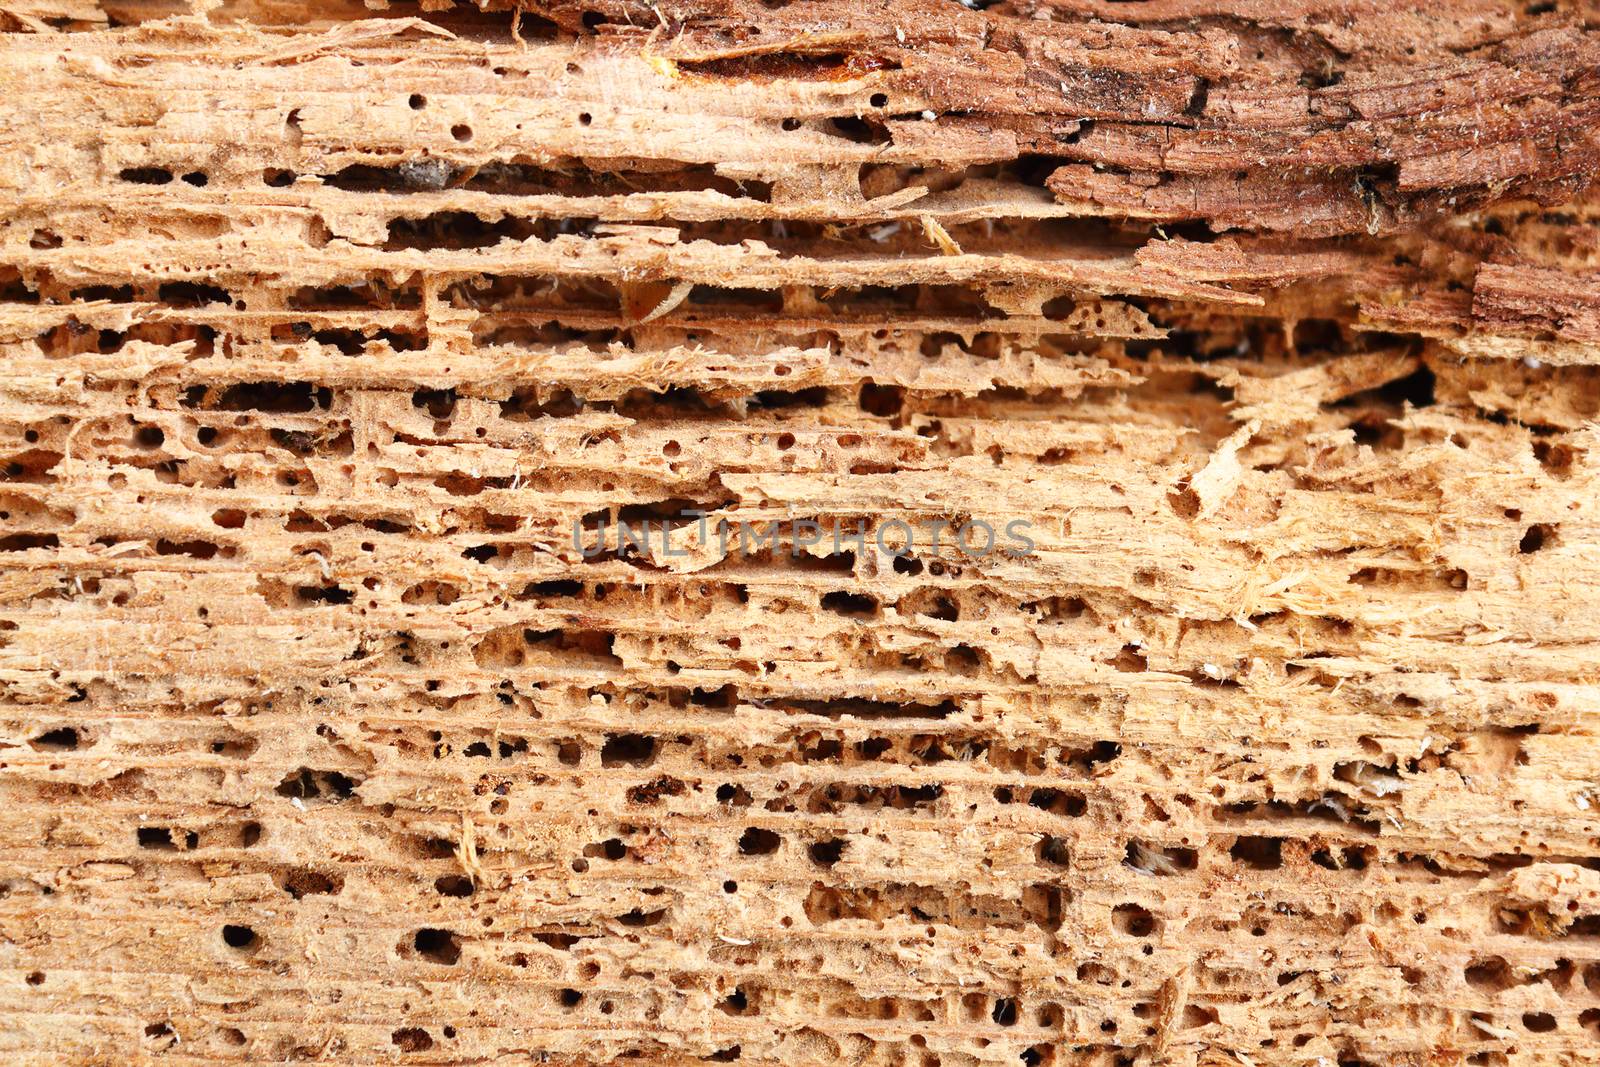 detail of fir wood damaged by fungus and insects, wood boring beetle